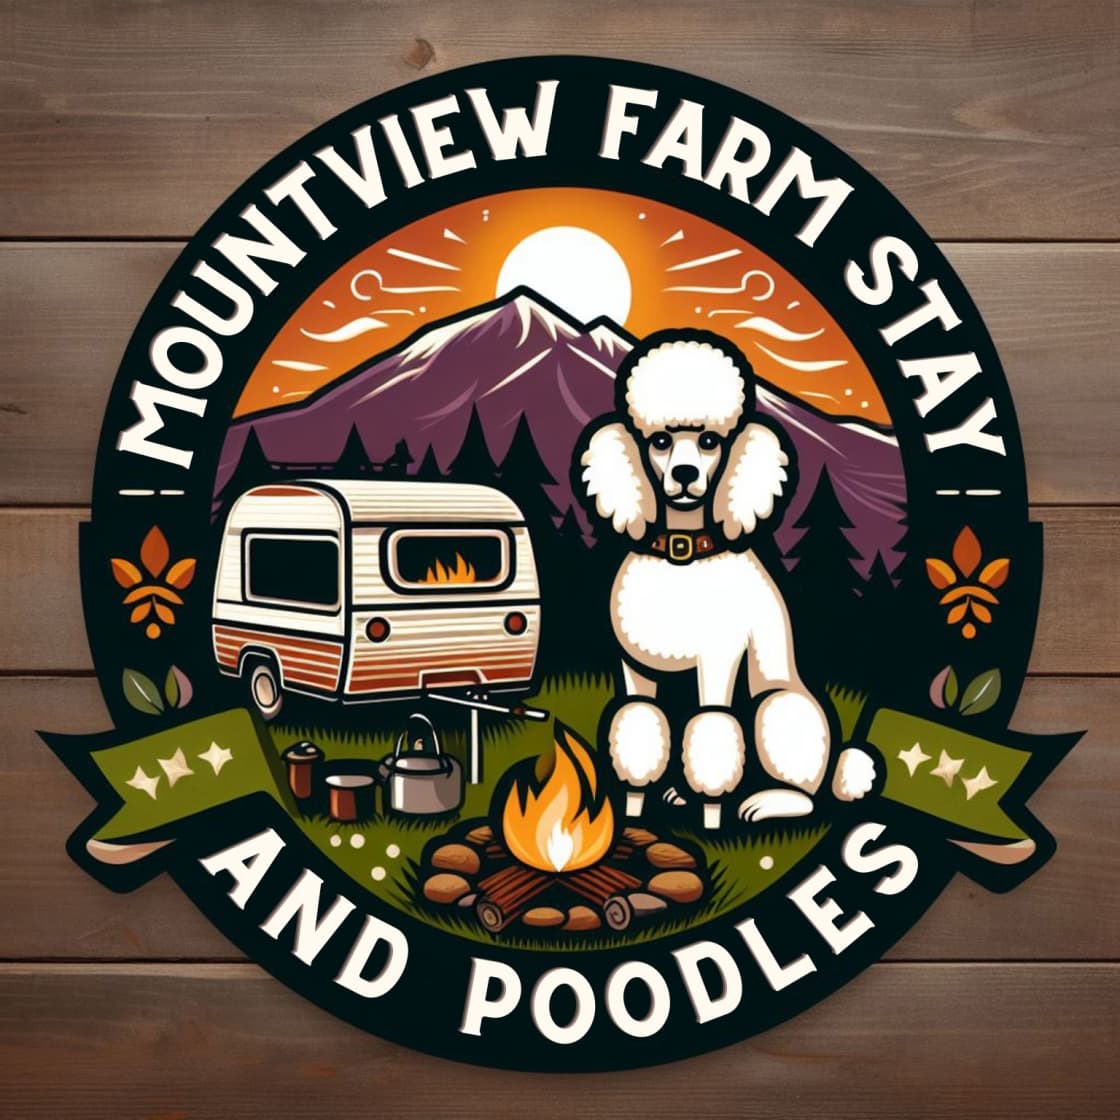 Mountview Farm Stay and Poodles